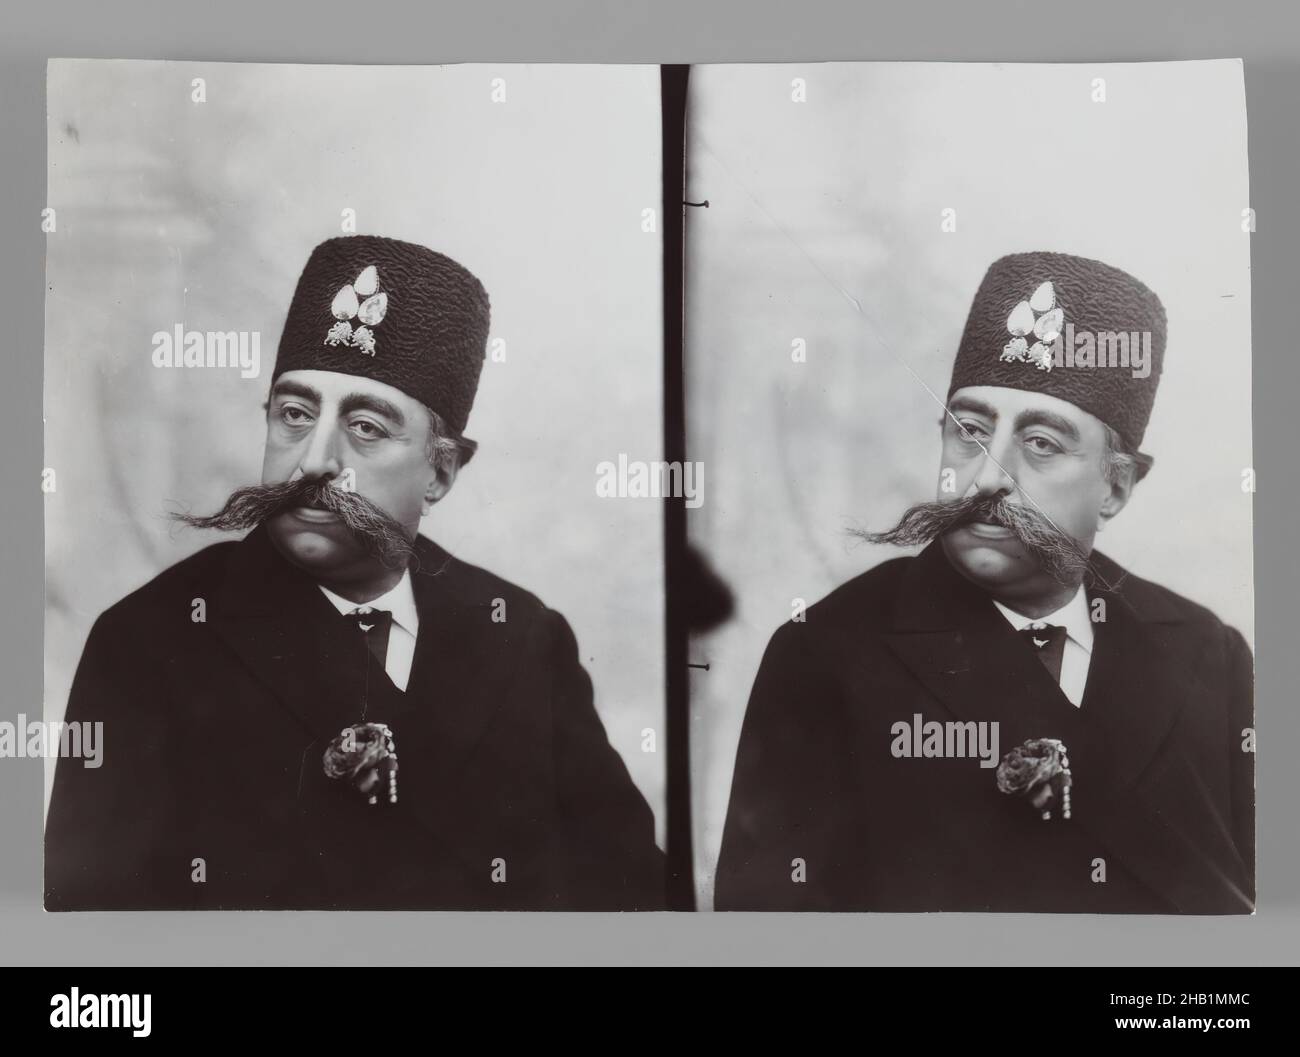 A Double Portrait of Mozaffar al-Din Shah, One of 274 Vintage Photographs, Gelatin silver printing out paper, late 19th-early 20th century, Qajar, Qajar Period, 4 7/16 x 6 1/4 in., 11.2 x 15.9 cm, 19th century, government, leader, Middle East, moustache, photograph, portrait, Shah, stereo card Stock Photo